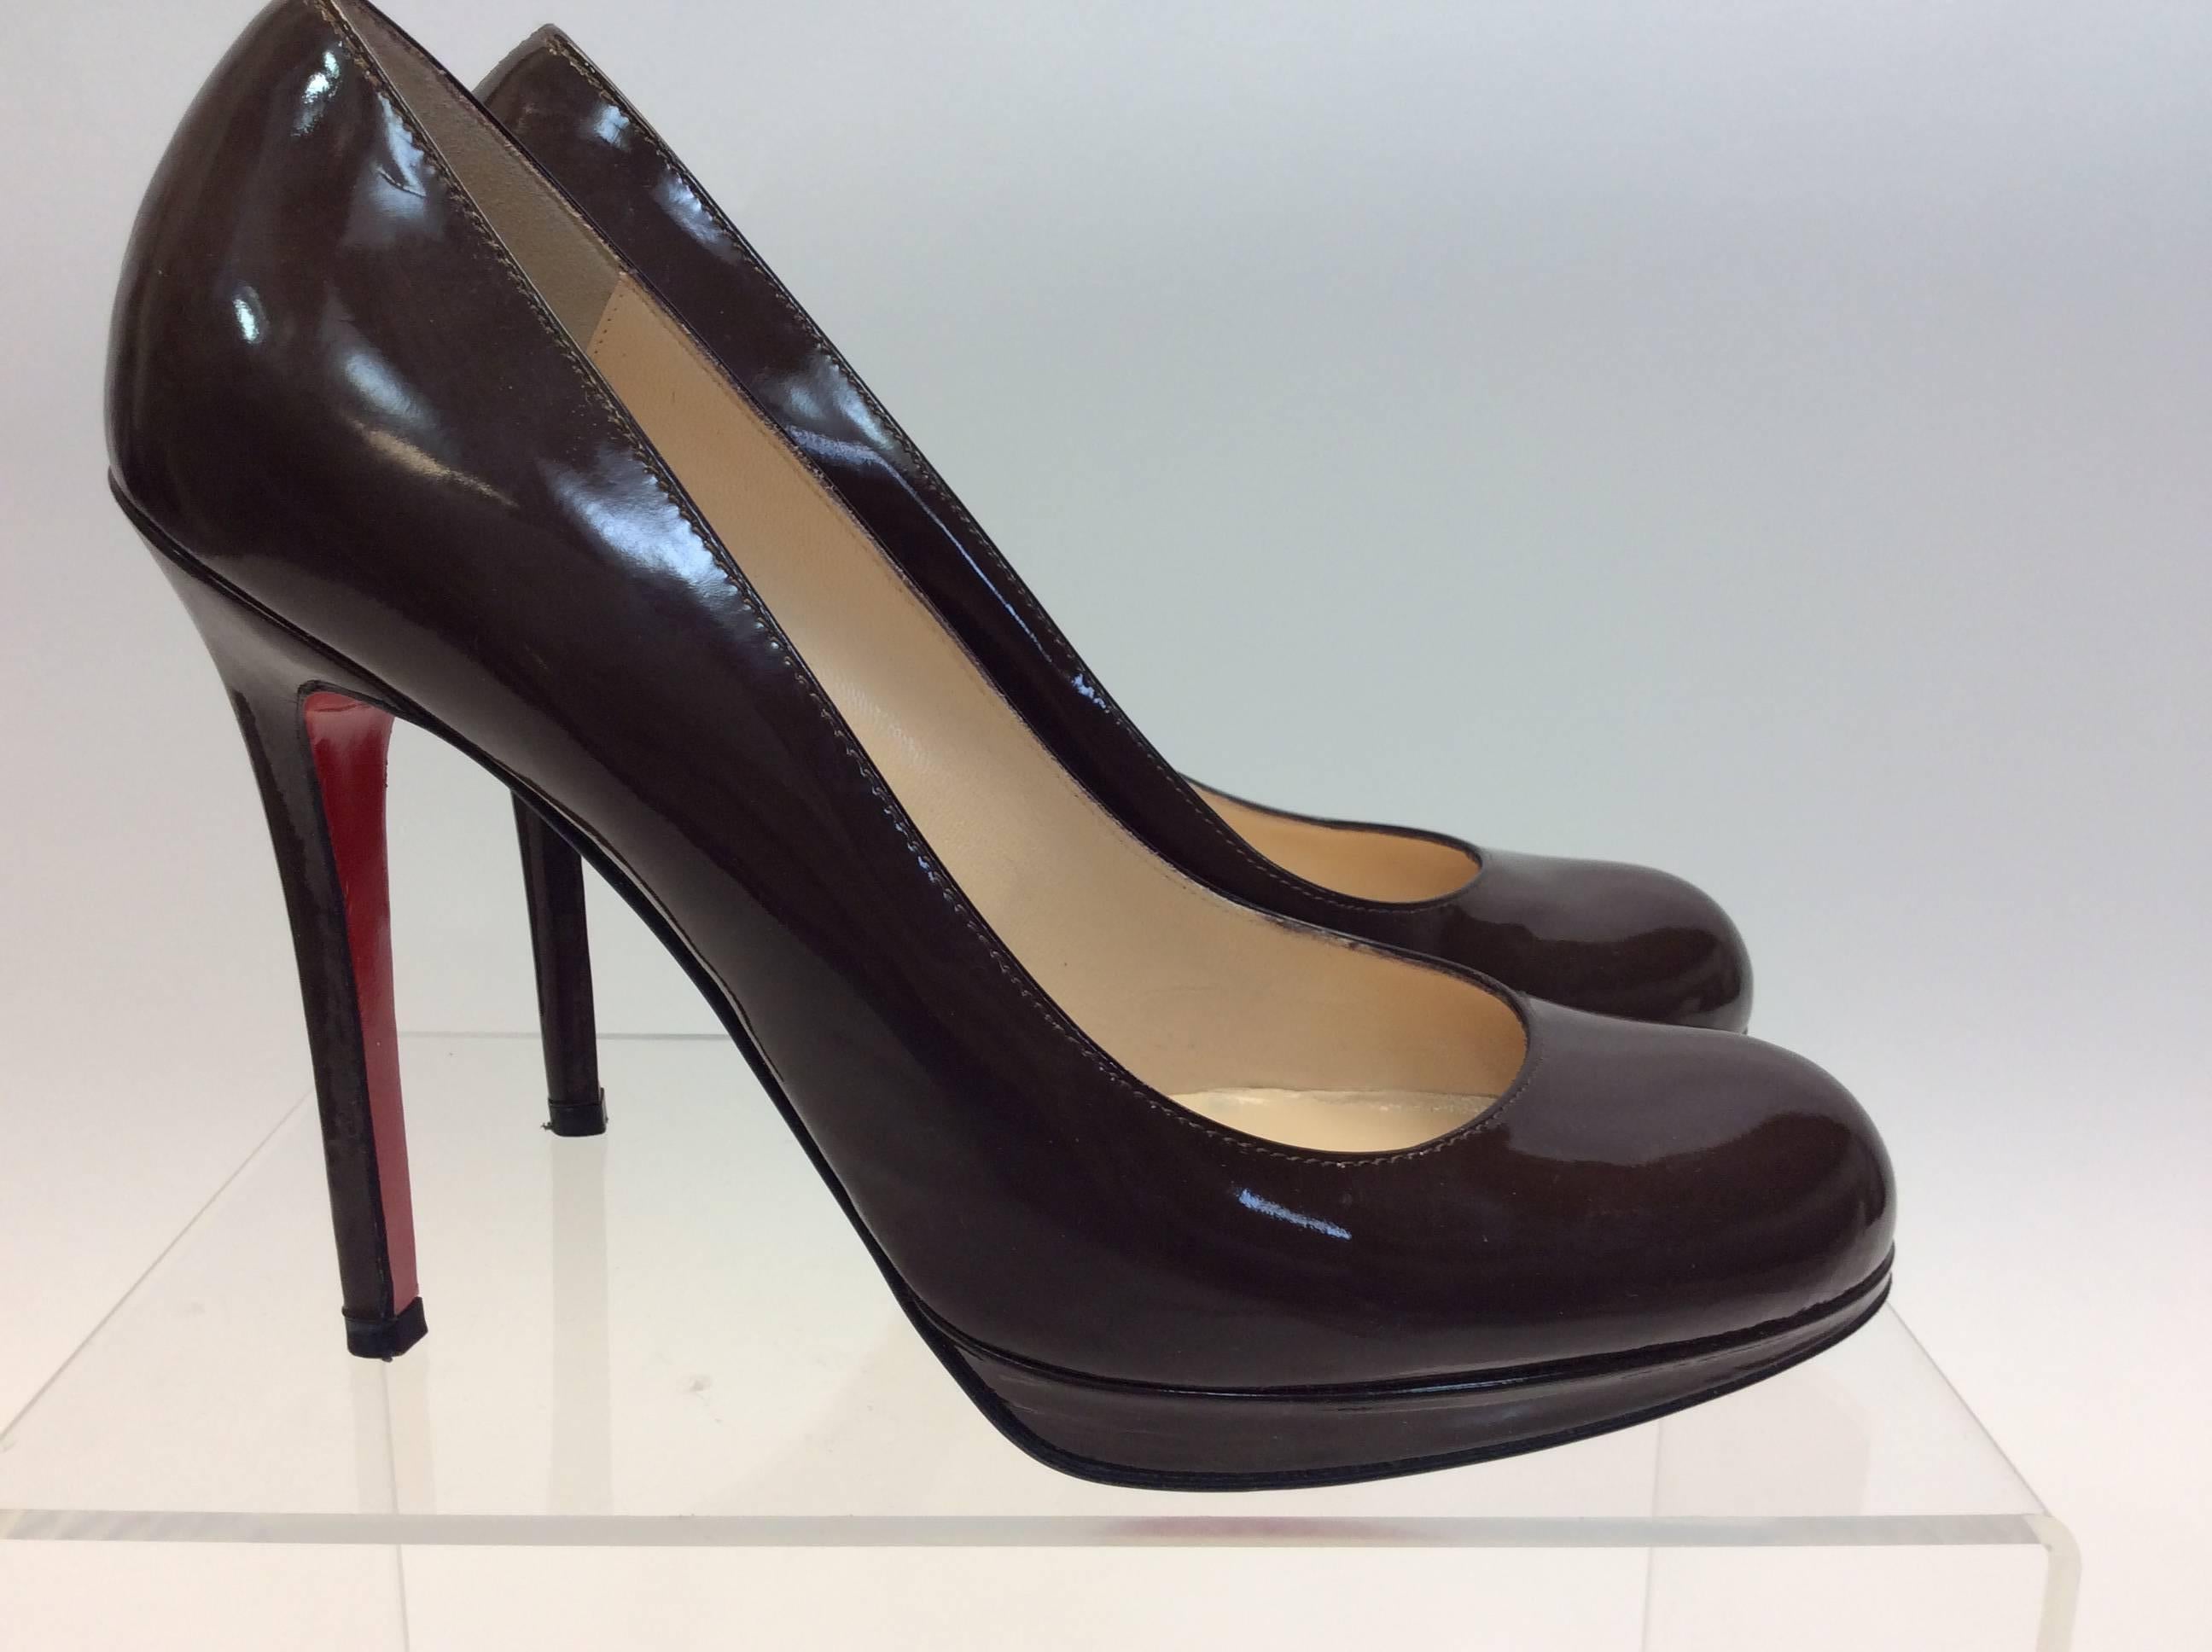 Christian Louboutin Brown Patent Leather Heels In Excellent Condition For Sale In Narberth, PA